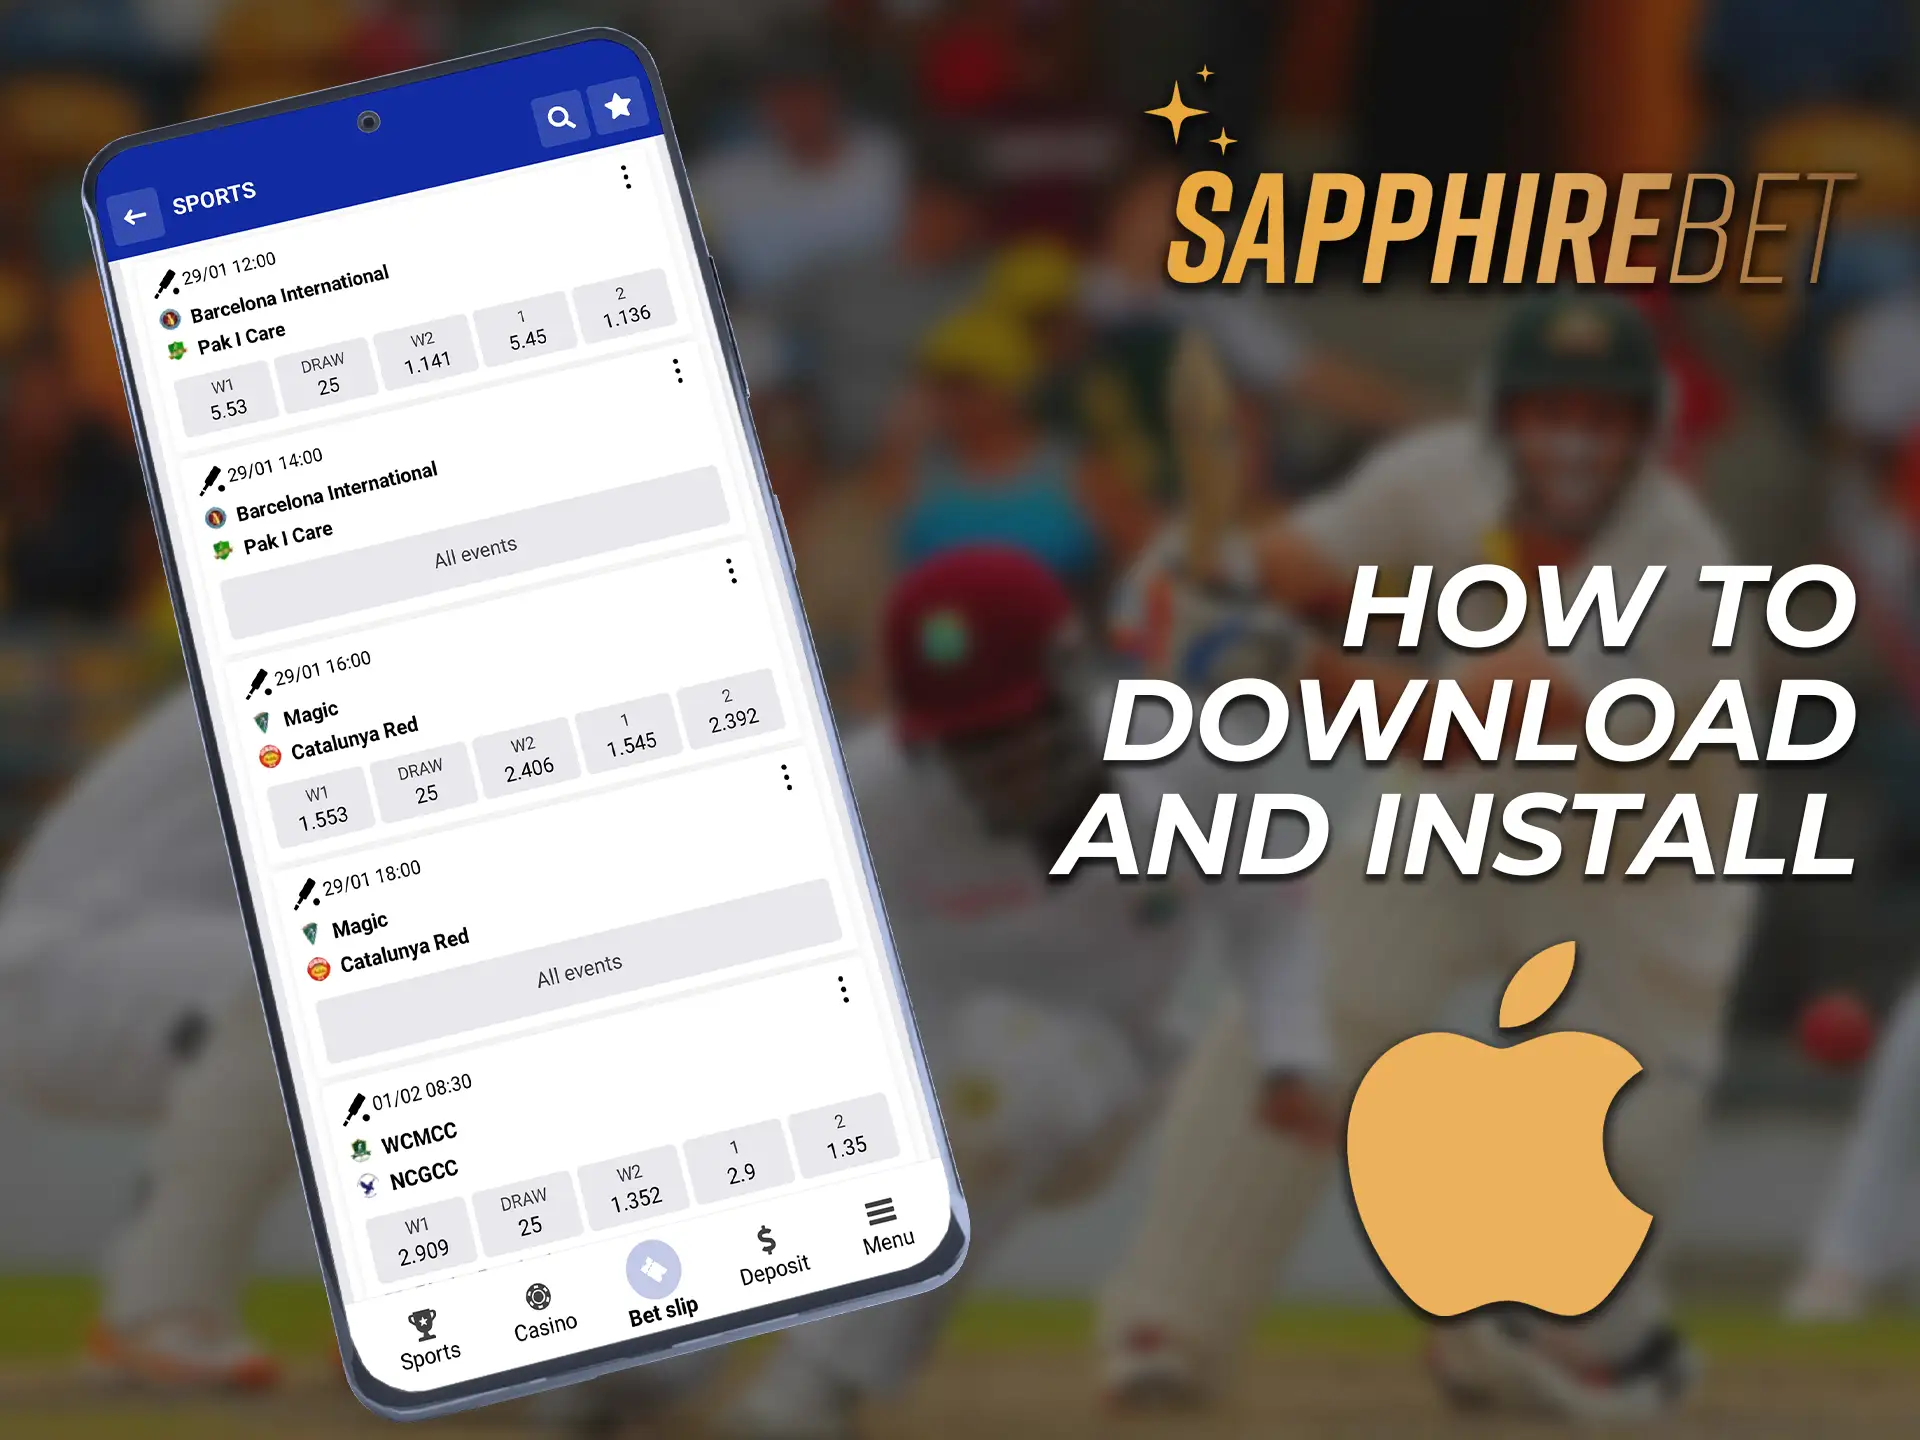 The SapphireBet app for iOS is in development.